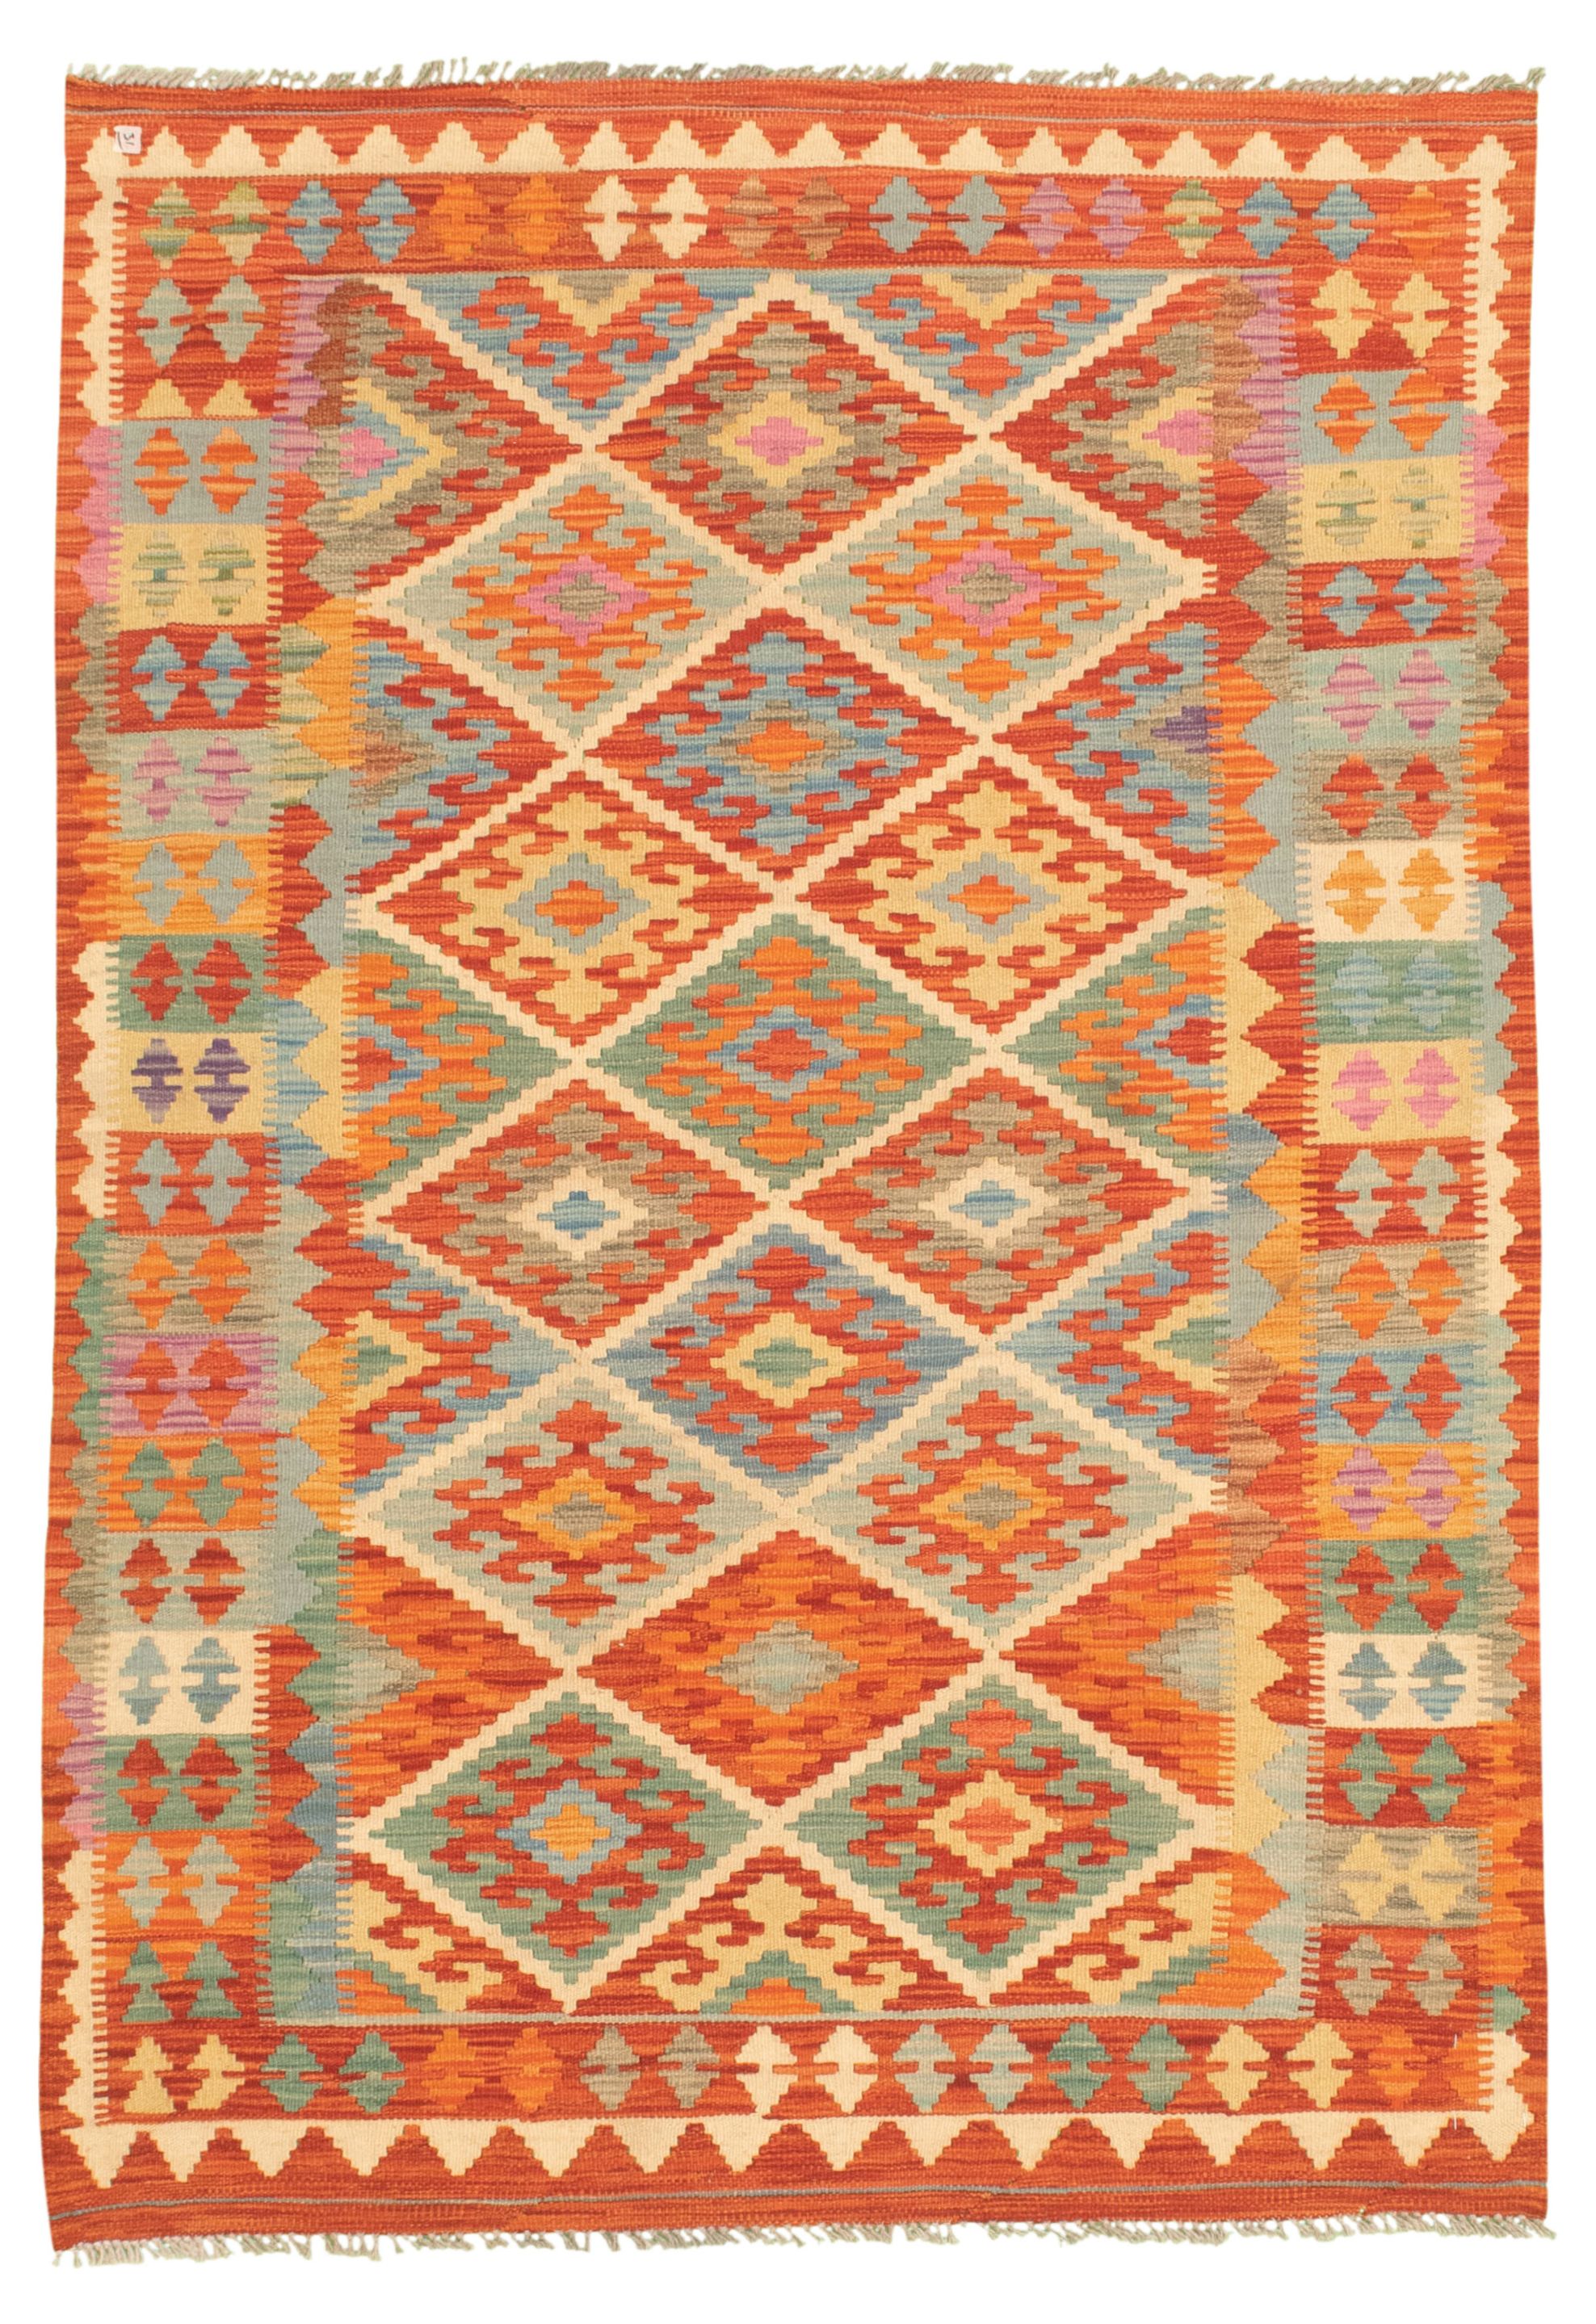 Hand woven Bold and Colorful  Dark Copper Wool Kilim 4'3" x 6'1"  Size: 4'3" x 6'1"  